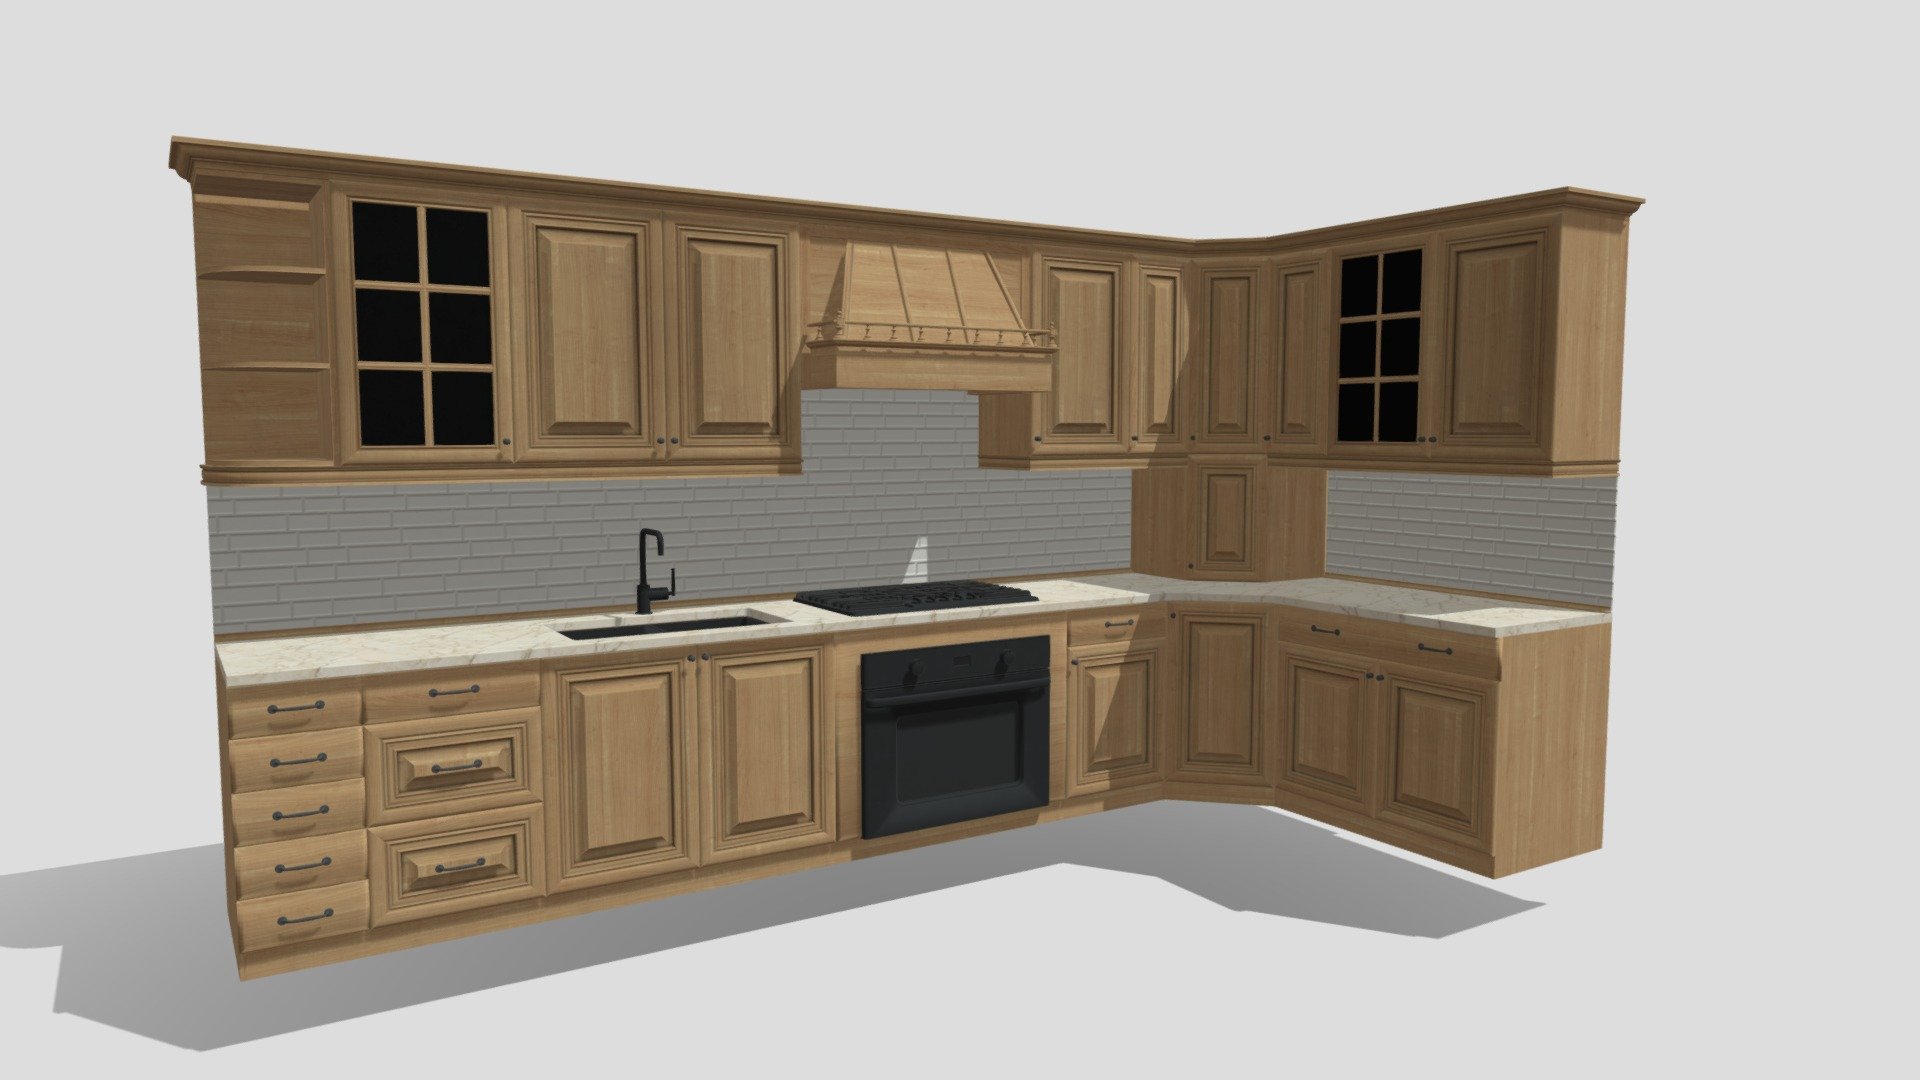 3D Kitchen Cabinets
The pack has highly detailed kitchen cabinets ready for use in your project. Just drag and drop prefabs into your scene and achieve beautiful results in no time. Available formats FBX, 3DS Max 2017



We are here to empower the creators. Please contact us via the [Contact US](https://aaanimators.com/#contact-area) page if you are having issues with our assets. 




The following document provides a highly detailed description of the asset:
[READ ME](https://medium.com/@aaanimators/3d-asset-pack-low-poly-tables-pack-arabic-21125c8bb0f7)




Includes 2 sets of materials with 3 textures:




● Diffuse

● Normal

● Specular - Low Poly Kitchen Cabinets - Buy Royalty Free 3D model by aaanimators 3d model